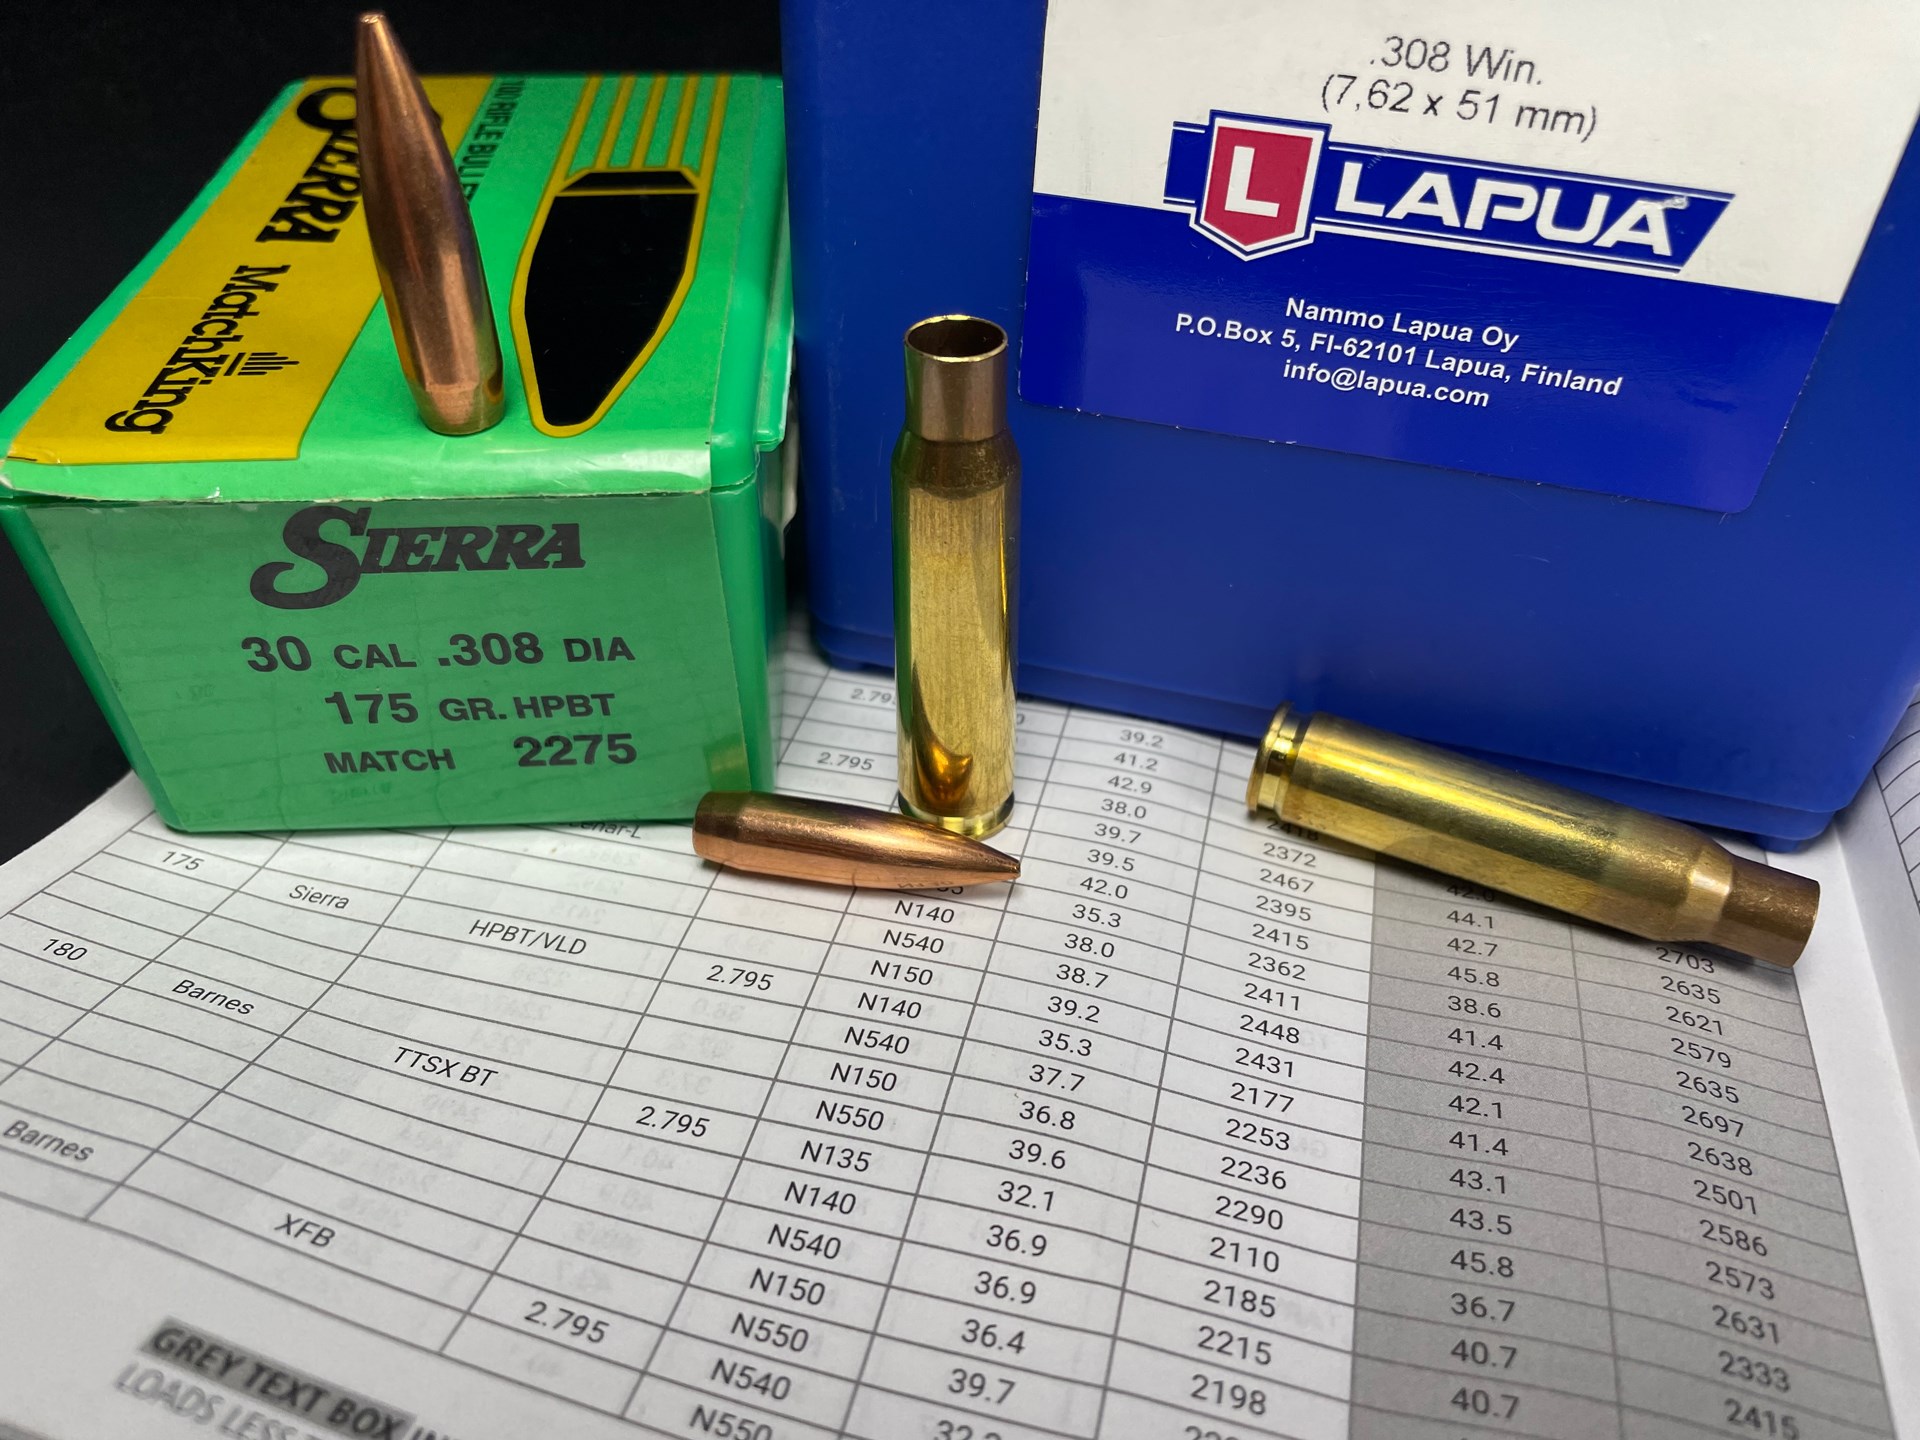 When using heavy-for-caliber bullets, such as 175-grain projectiles in the .308 Win., opt for high-energy propellants to attain a boost in velocity. Options within the Vihtavuori line, which are shown in this Vihtavuori pamphlet, are found in its N500 series.